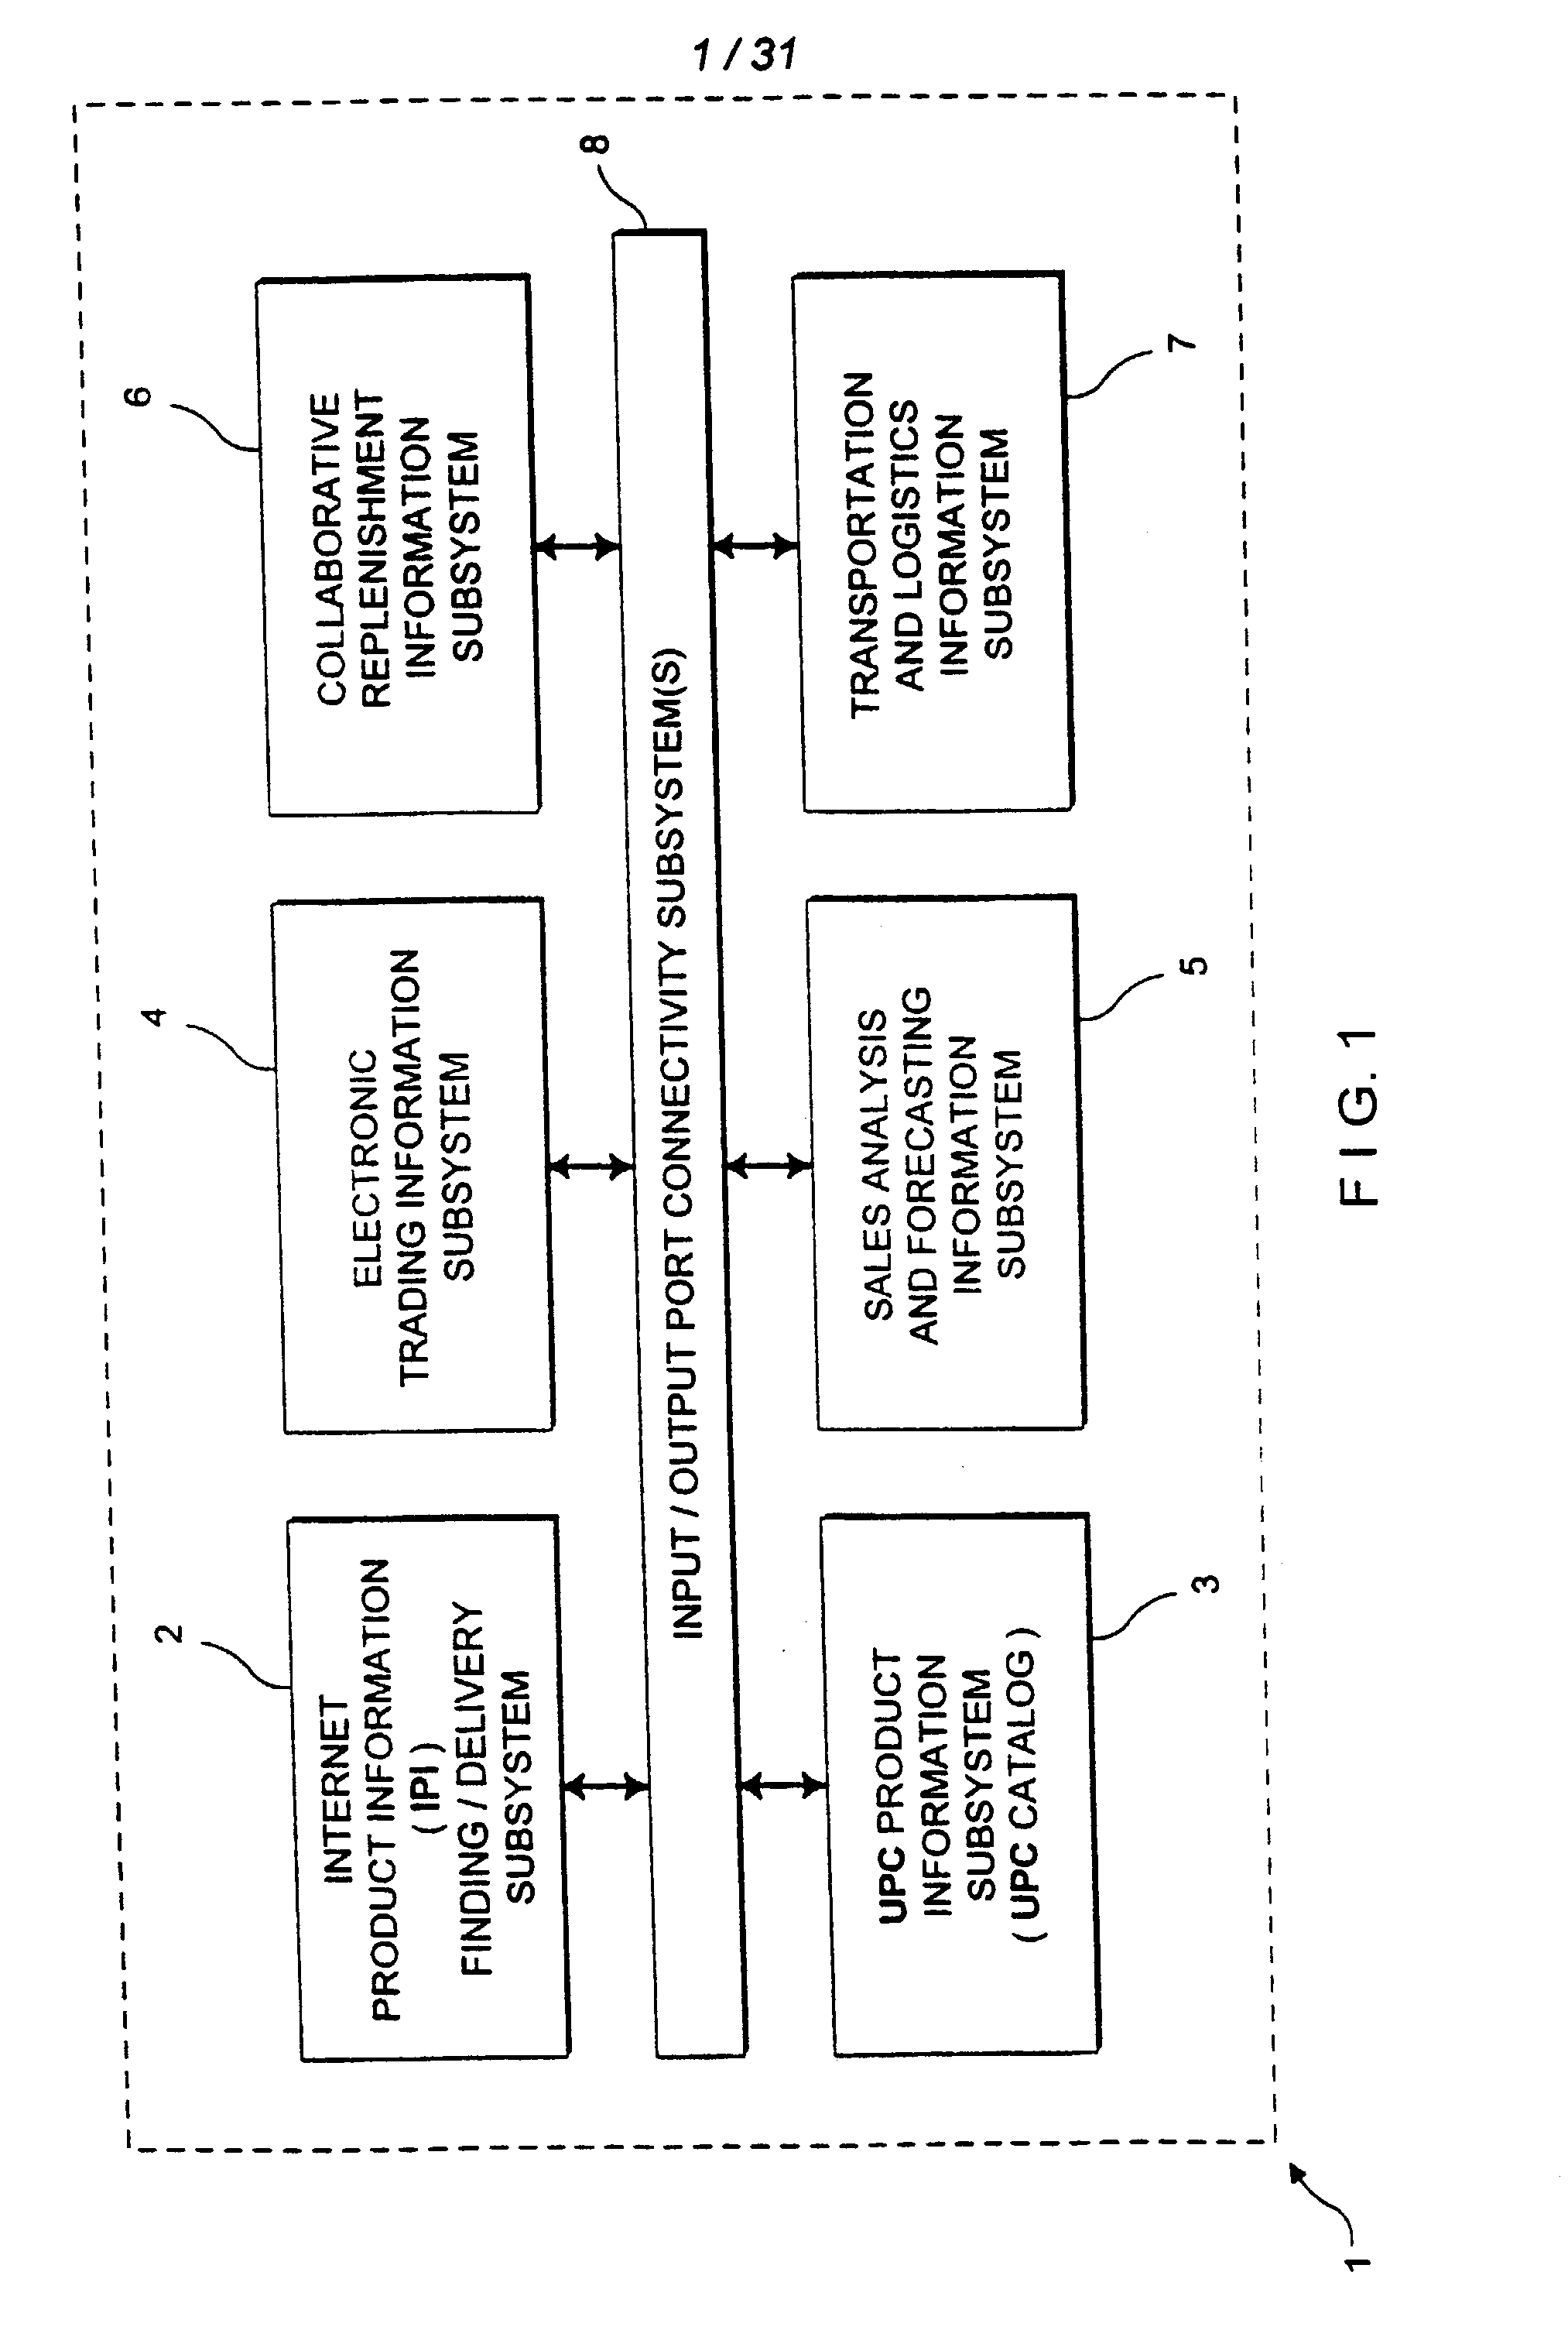 System and method for managing and serving consumer product related information over the internet